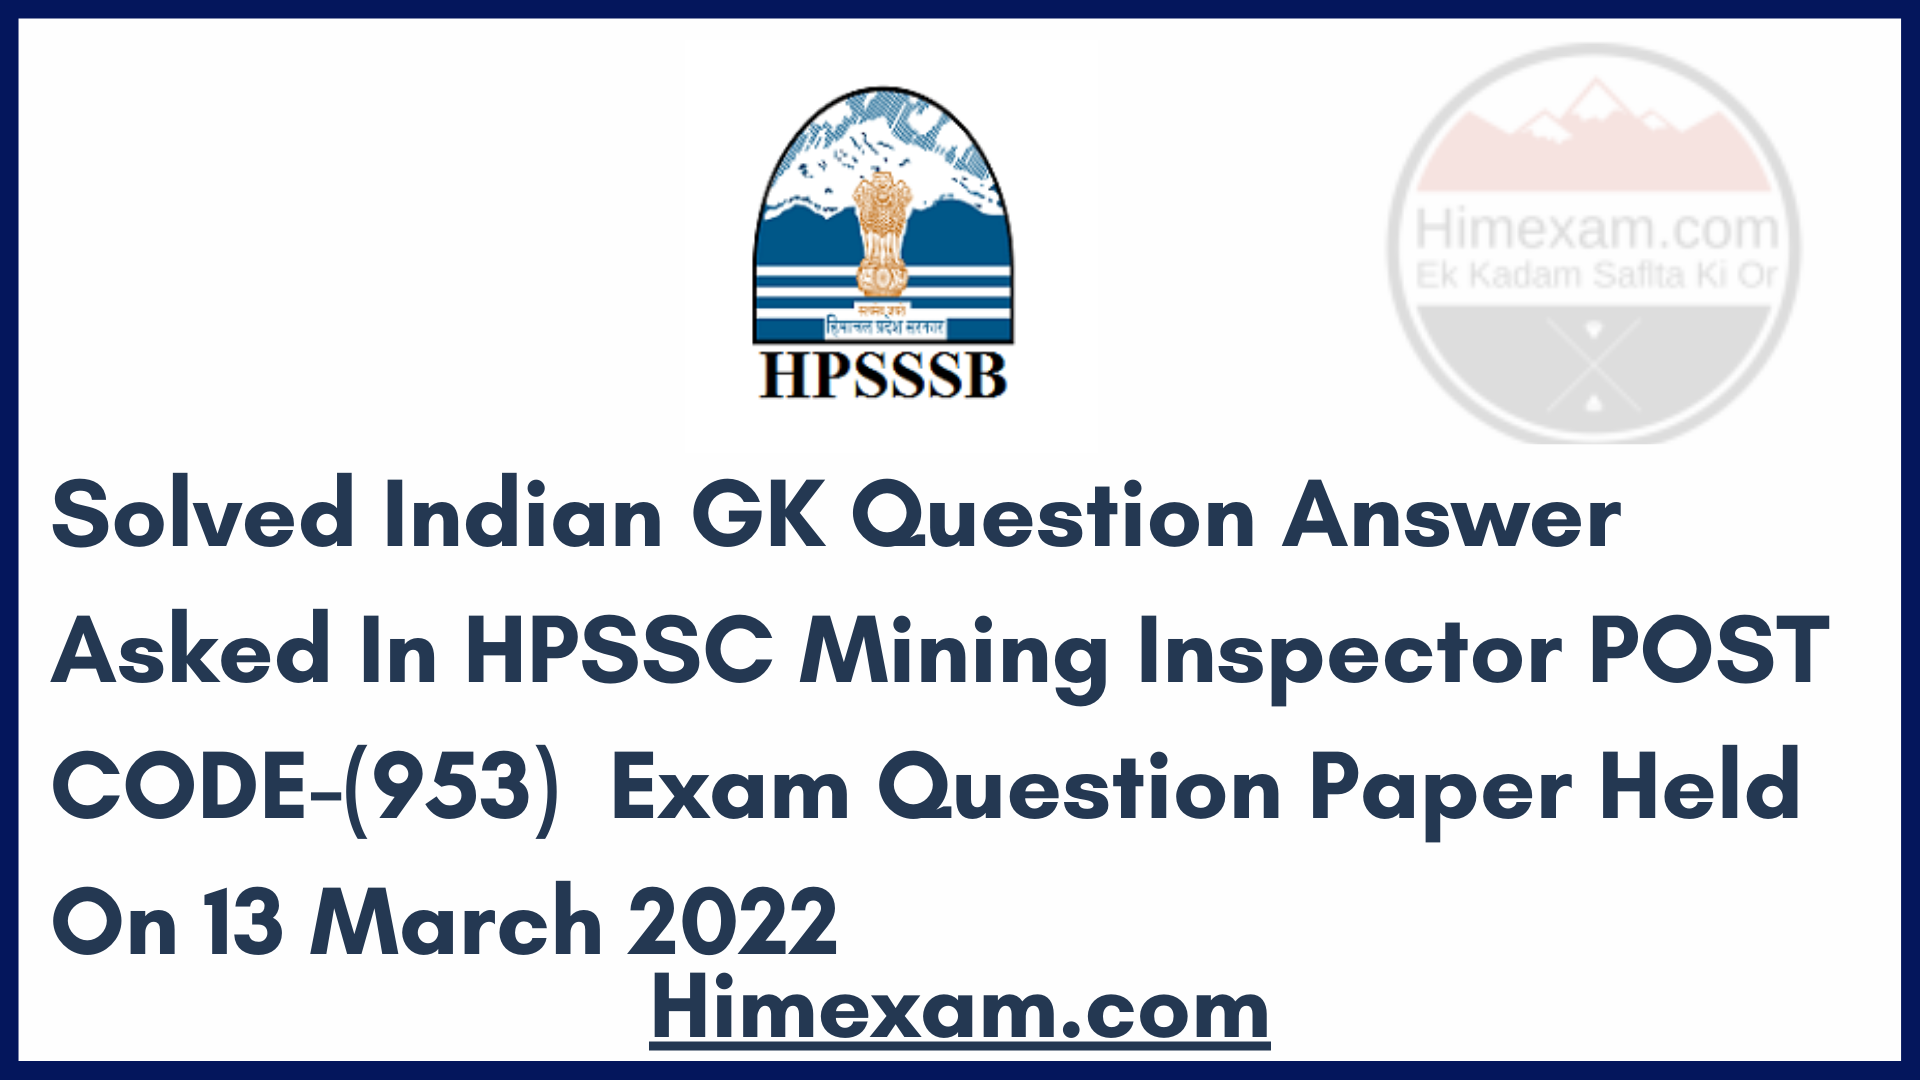 Solved Indian GK Question Answer Asked In HPSSC Mining Inspector POST CODE-(953)  Exam Question Paper Held On 13 March 2022